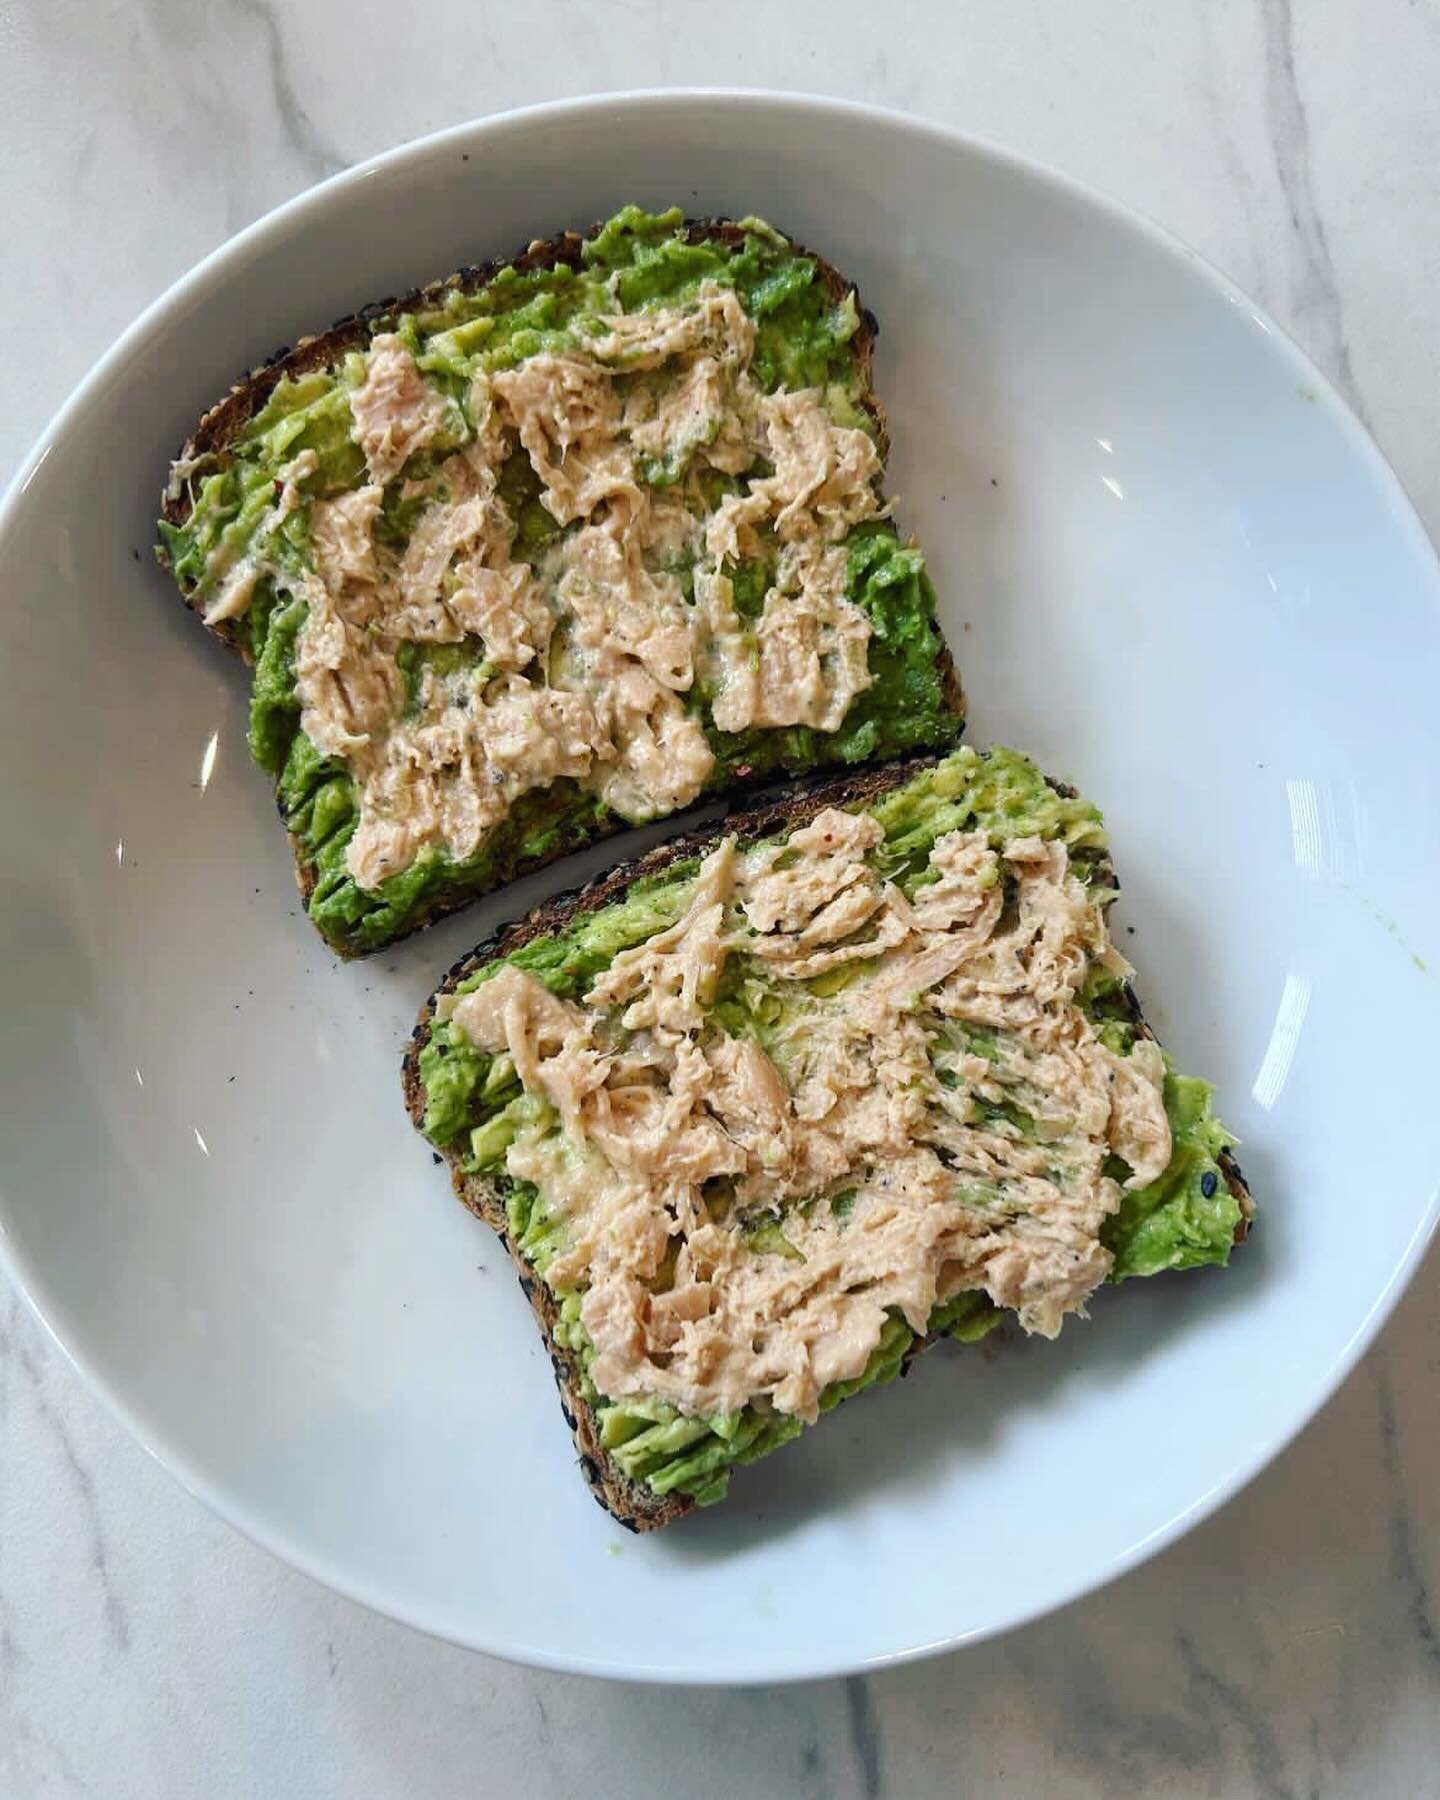 Can you make the viral Tunacado vegan? You bet your buns you can 💪🏼 Our Plant-based Tuna Salad is available in grocery stores across Canada and it&rsquo;s ready-to-eat which means all you need to add is 🥑 

📸: @nessiesveggies